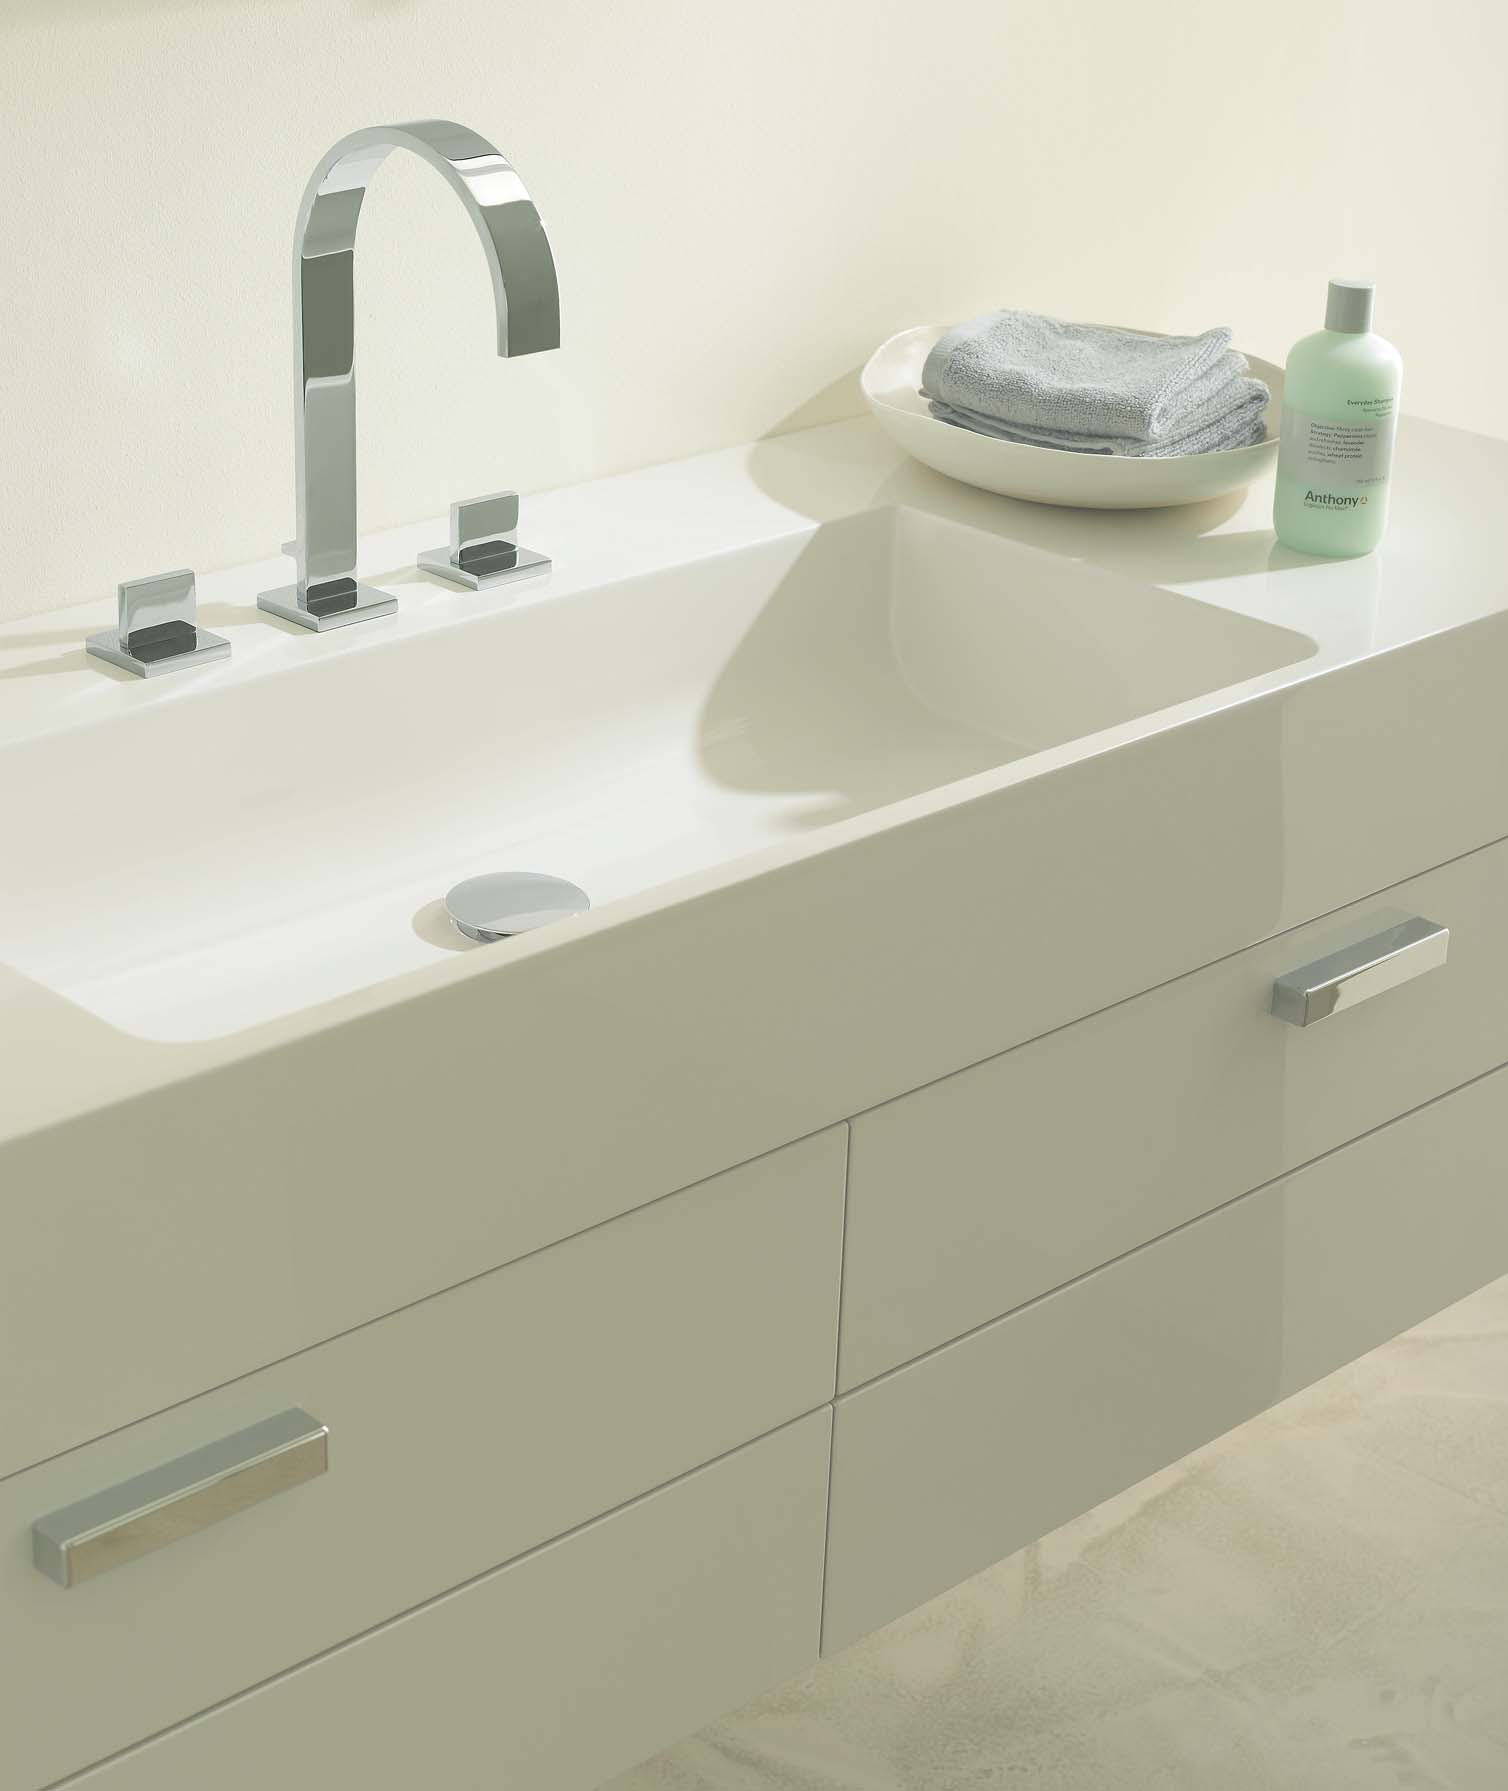 Form and format. Form und Format. Charisma and personality that s what Crono 1.0 is all about. Due to their common design, washtable and bathing vessel engage in a dialogue.